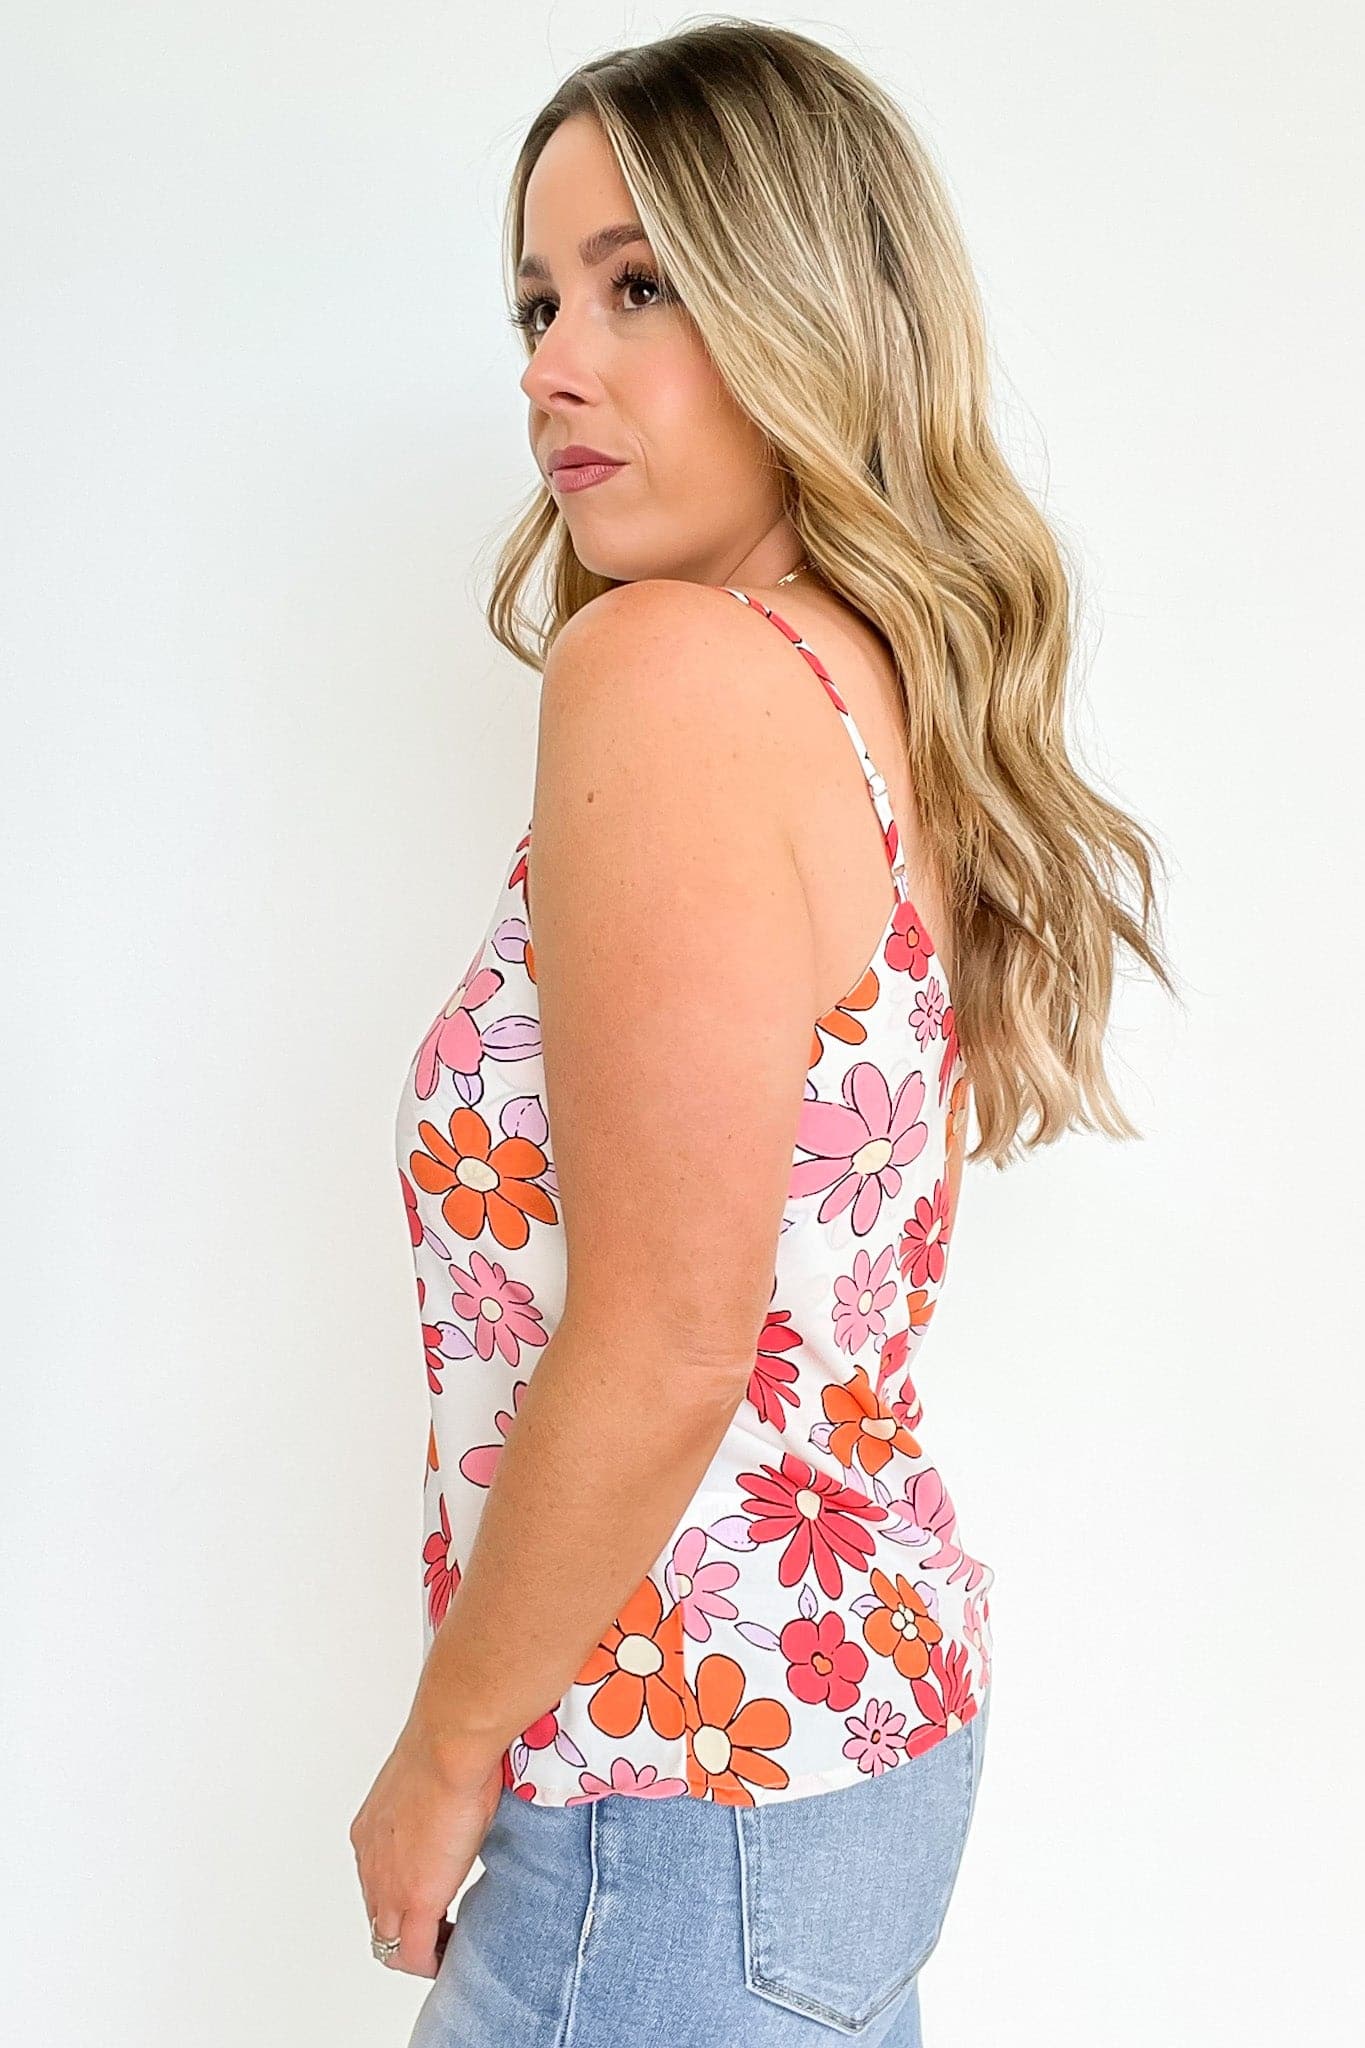  Gone Groovy Retro Floral Print Tank Top - FINAL SALE - Madison and Mallory